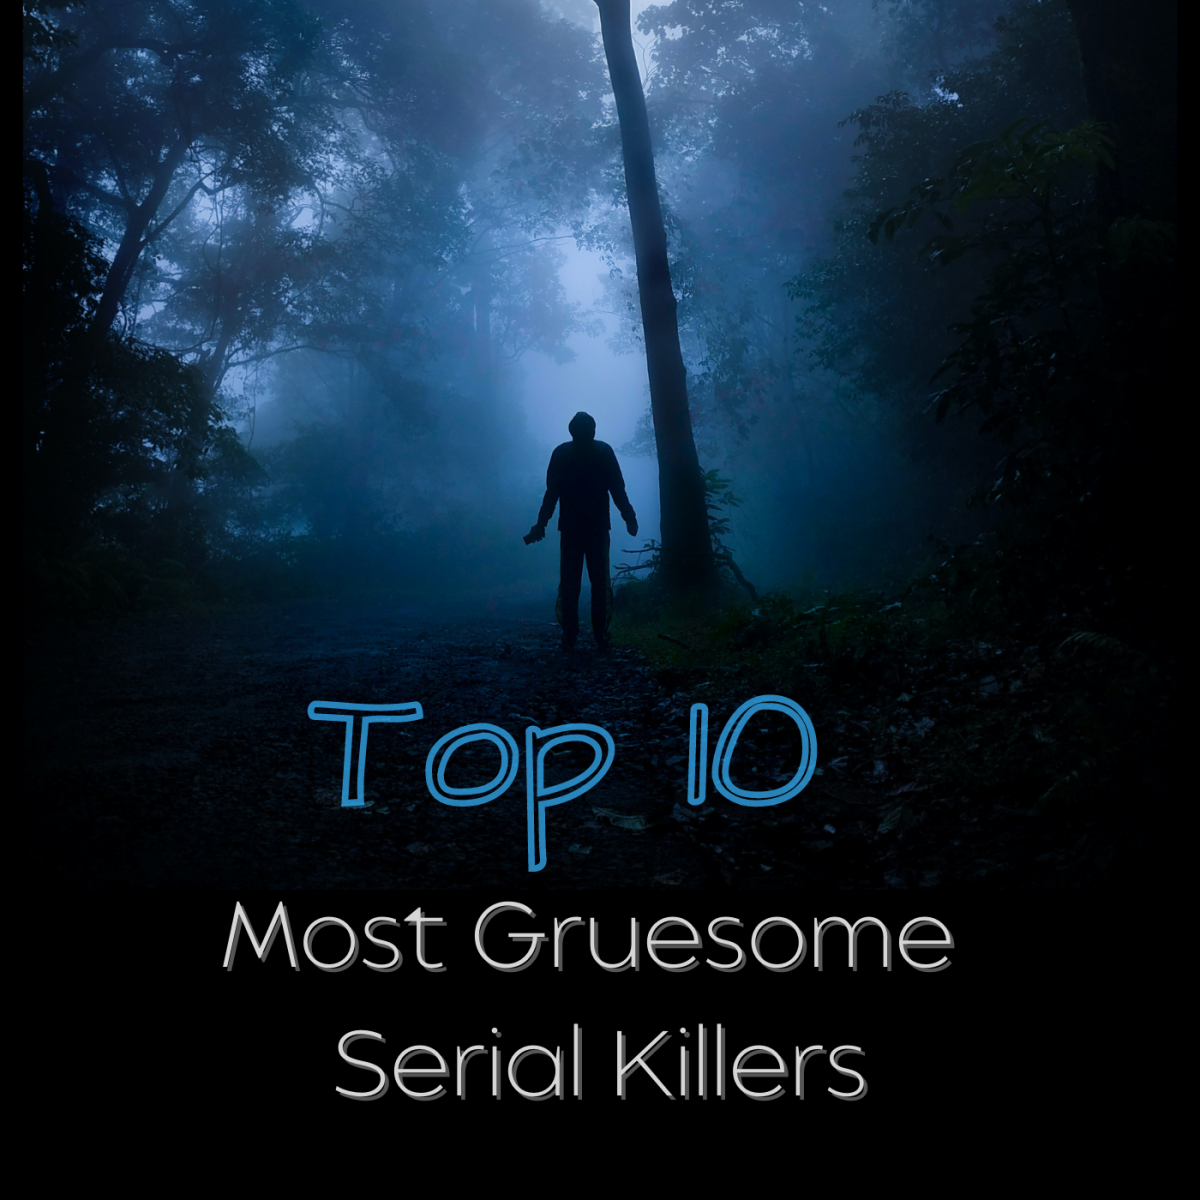 The Top 10 Most Gruesome Serial Killers